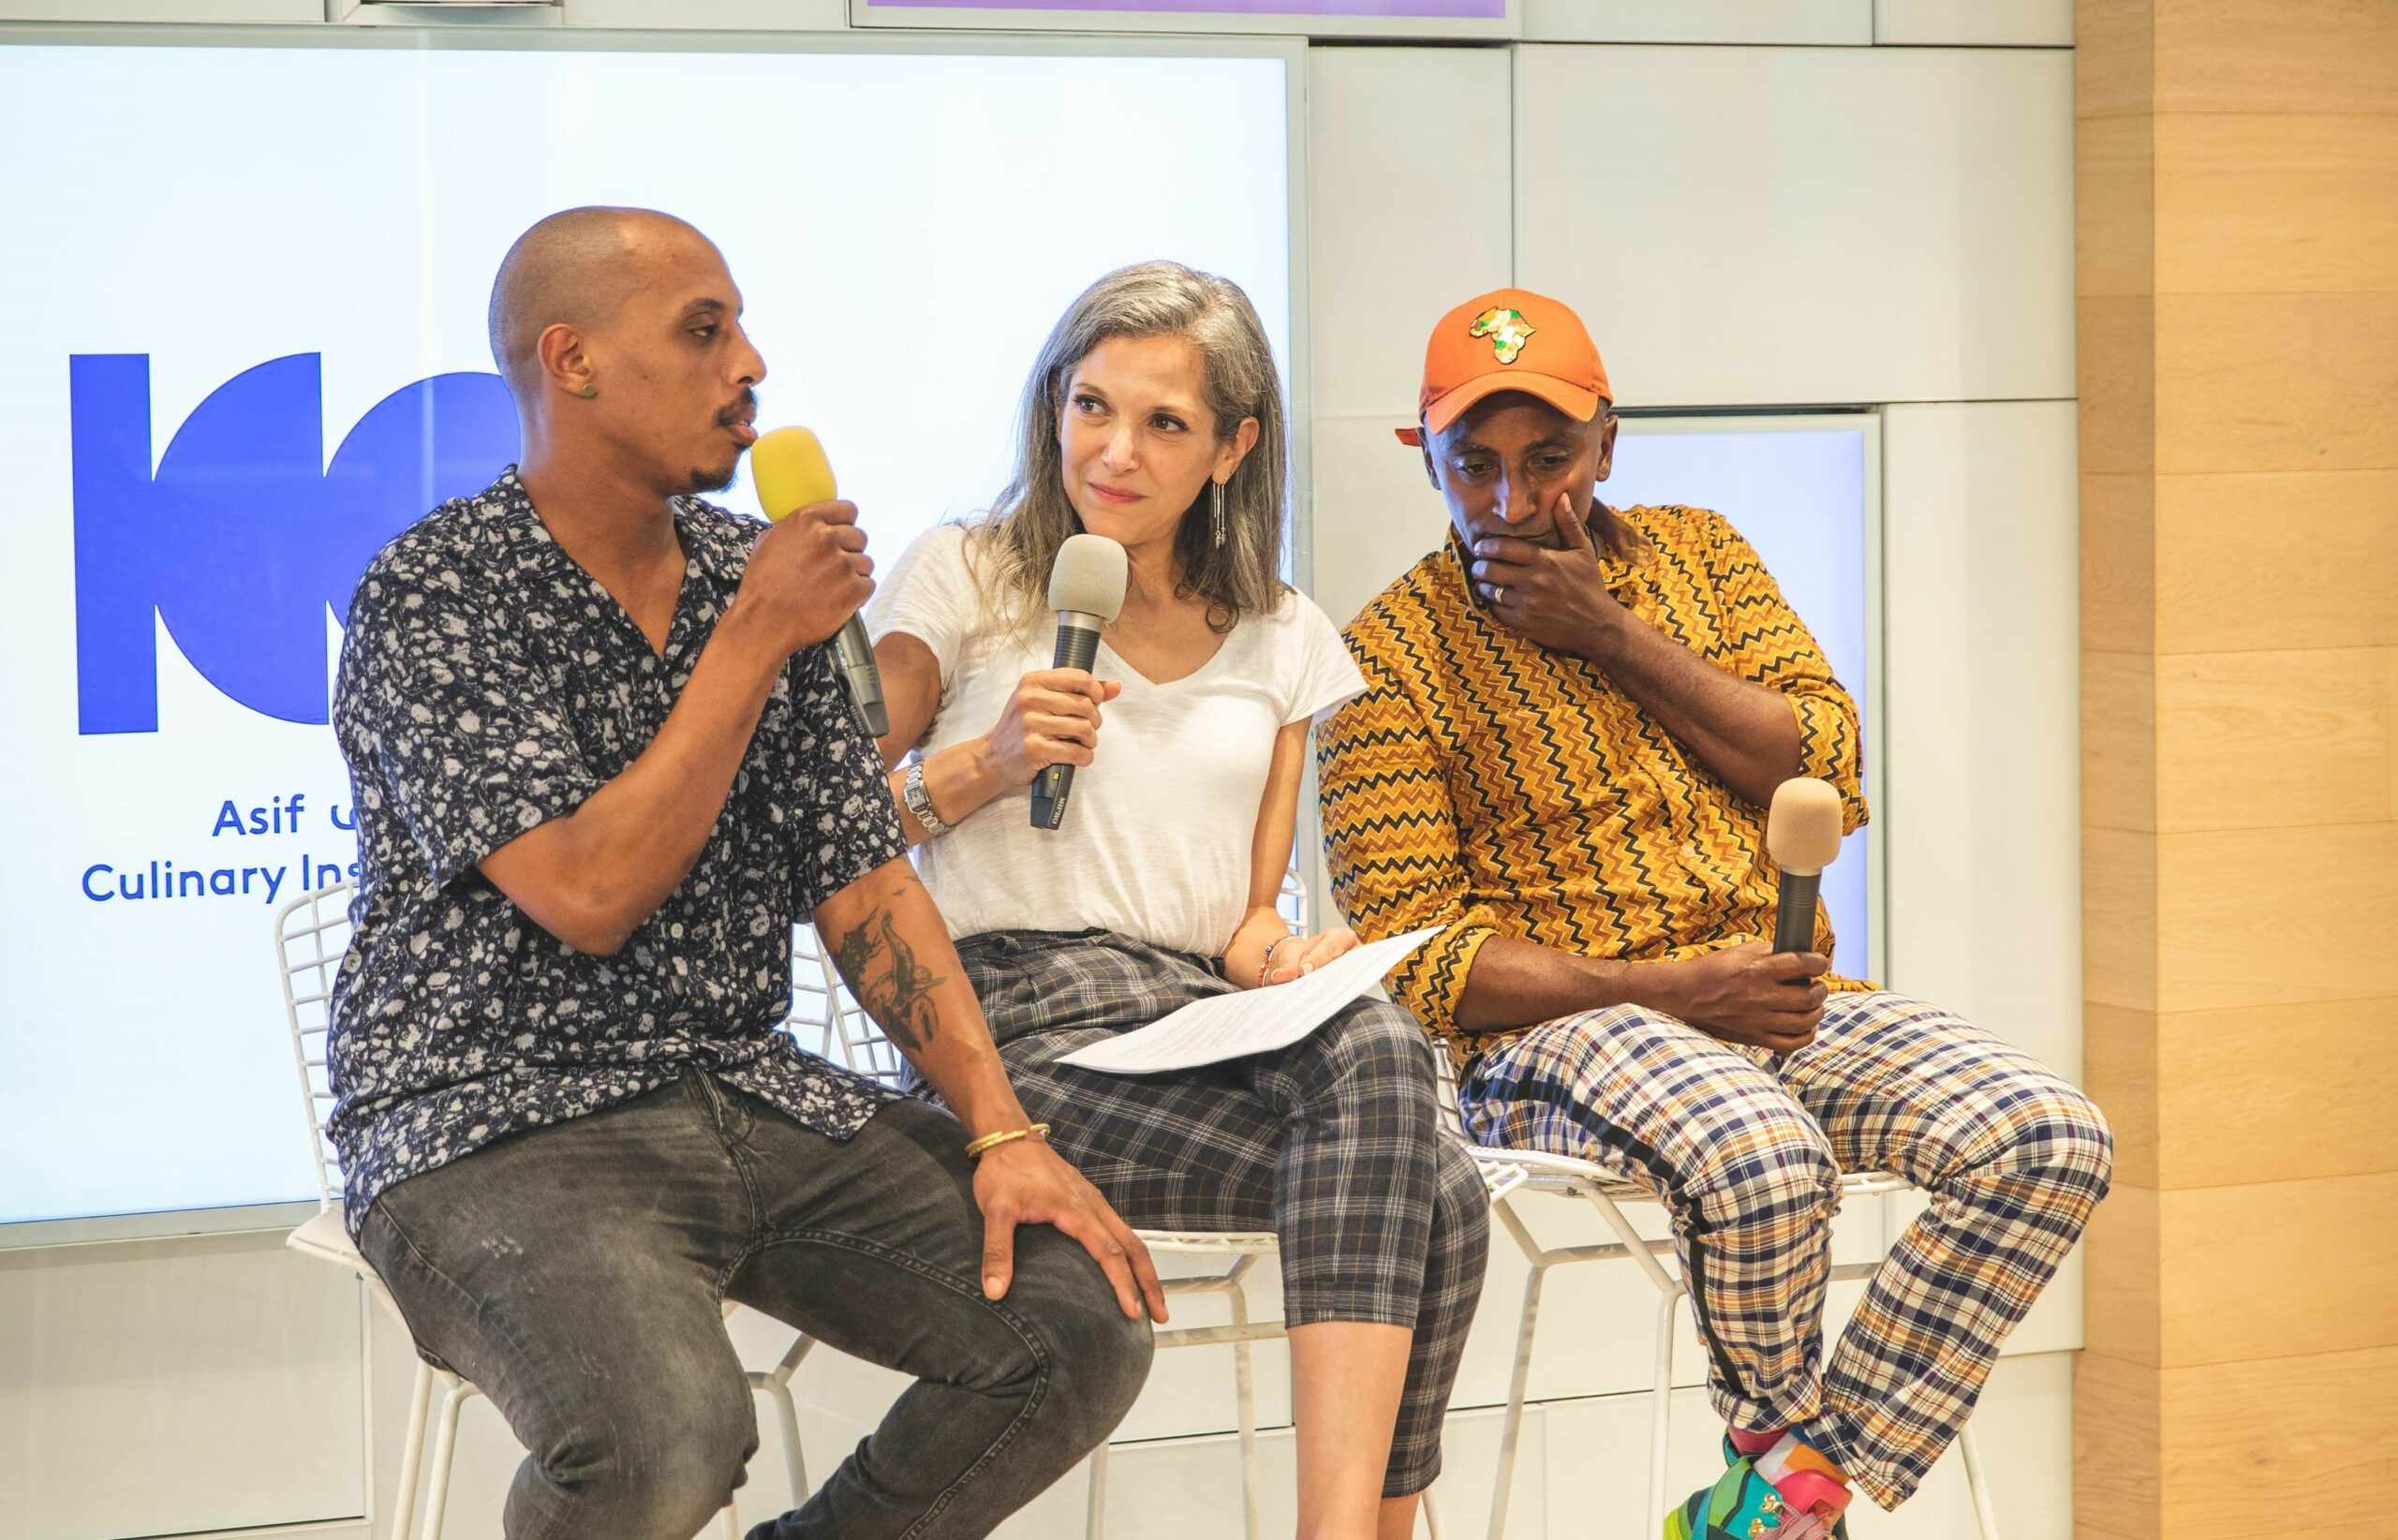 Chefs Marcus Samuelsson, Ruthie Russo, and Elazar Tamano sitting on stools, holding microphones